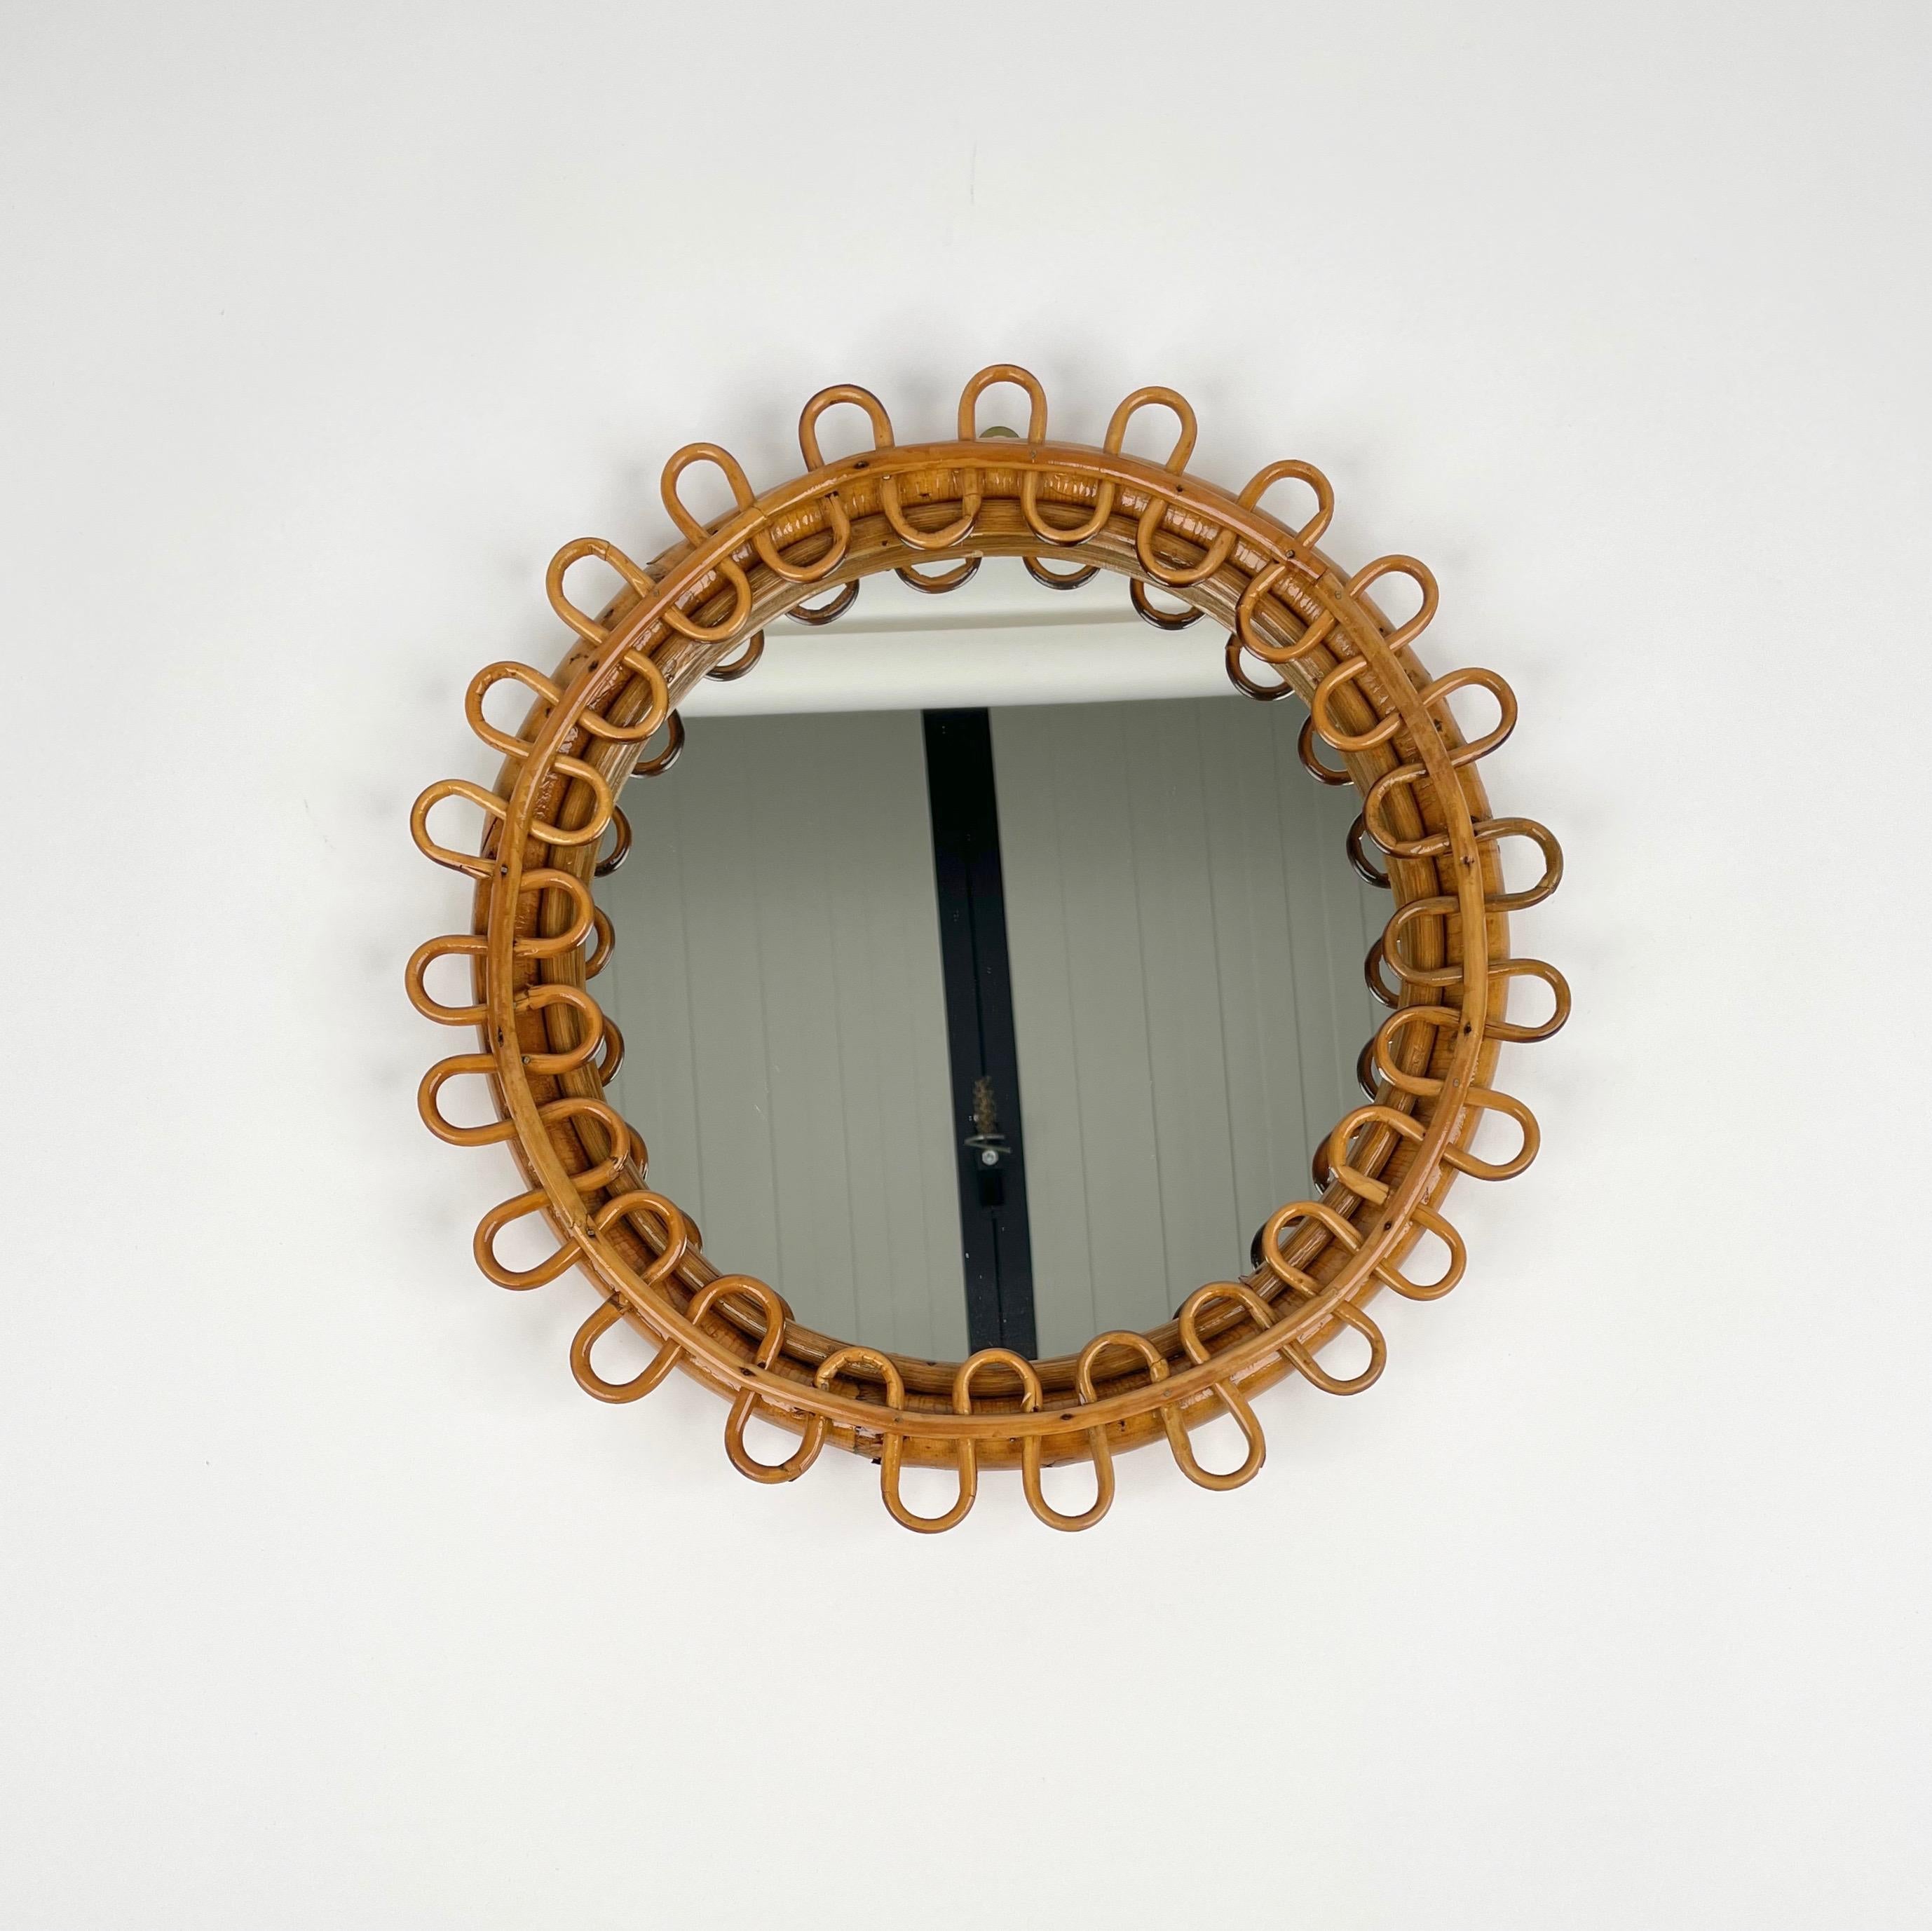 Beautiful little round wall mirror framed by bamboo and rattan. 

Made in Italy in the 1960s.